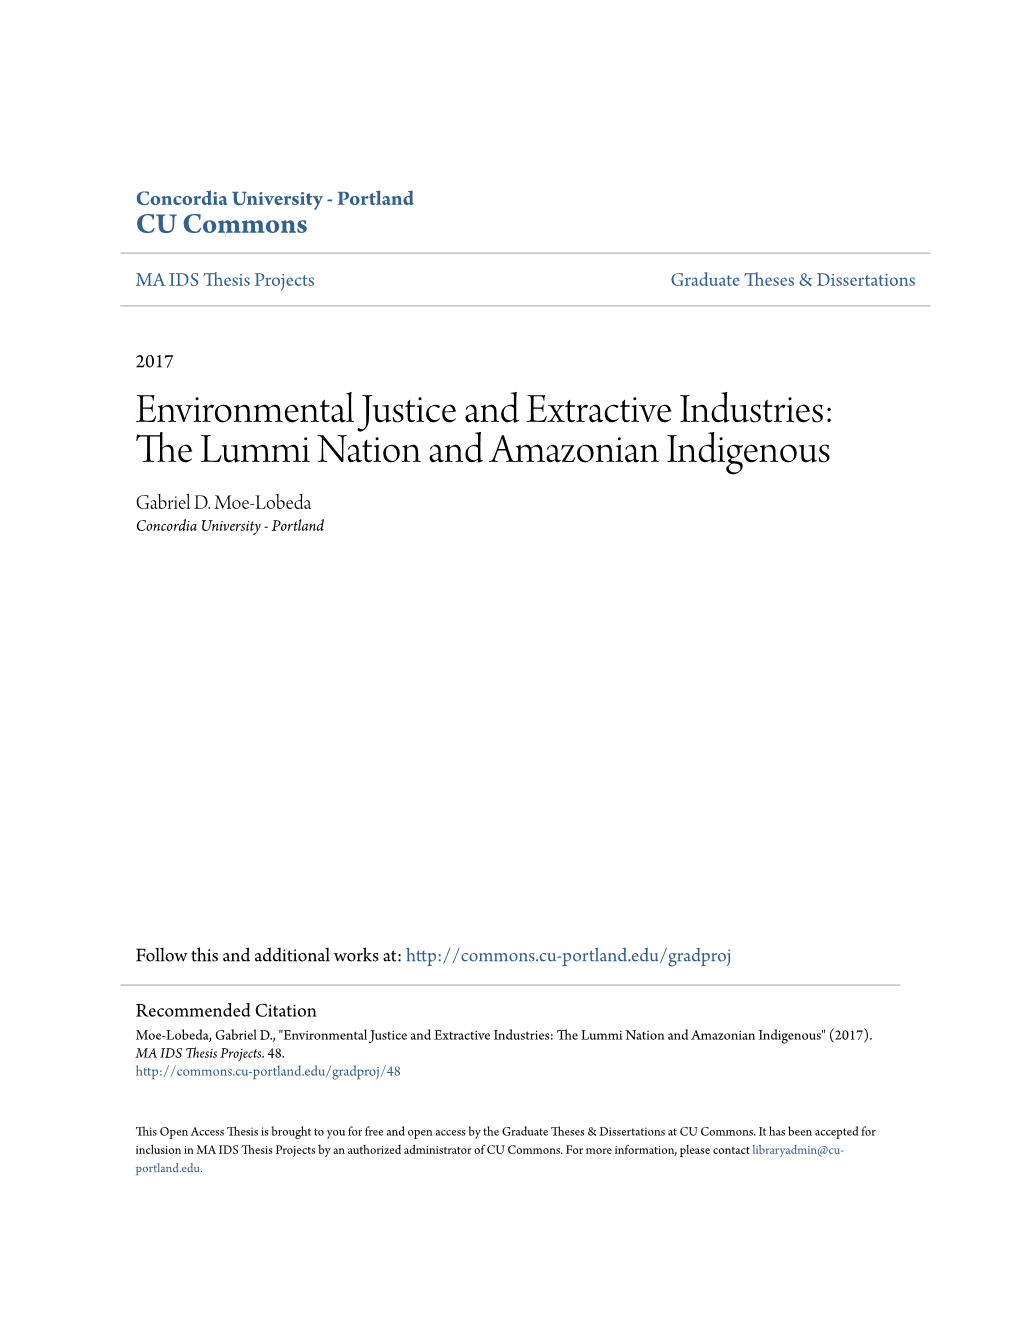 Environmental Justice and Extractive Industries: the Lummi Nation and Amazonian Indigenous Gabriel D